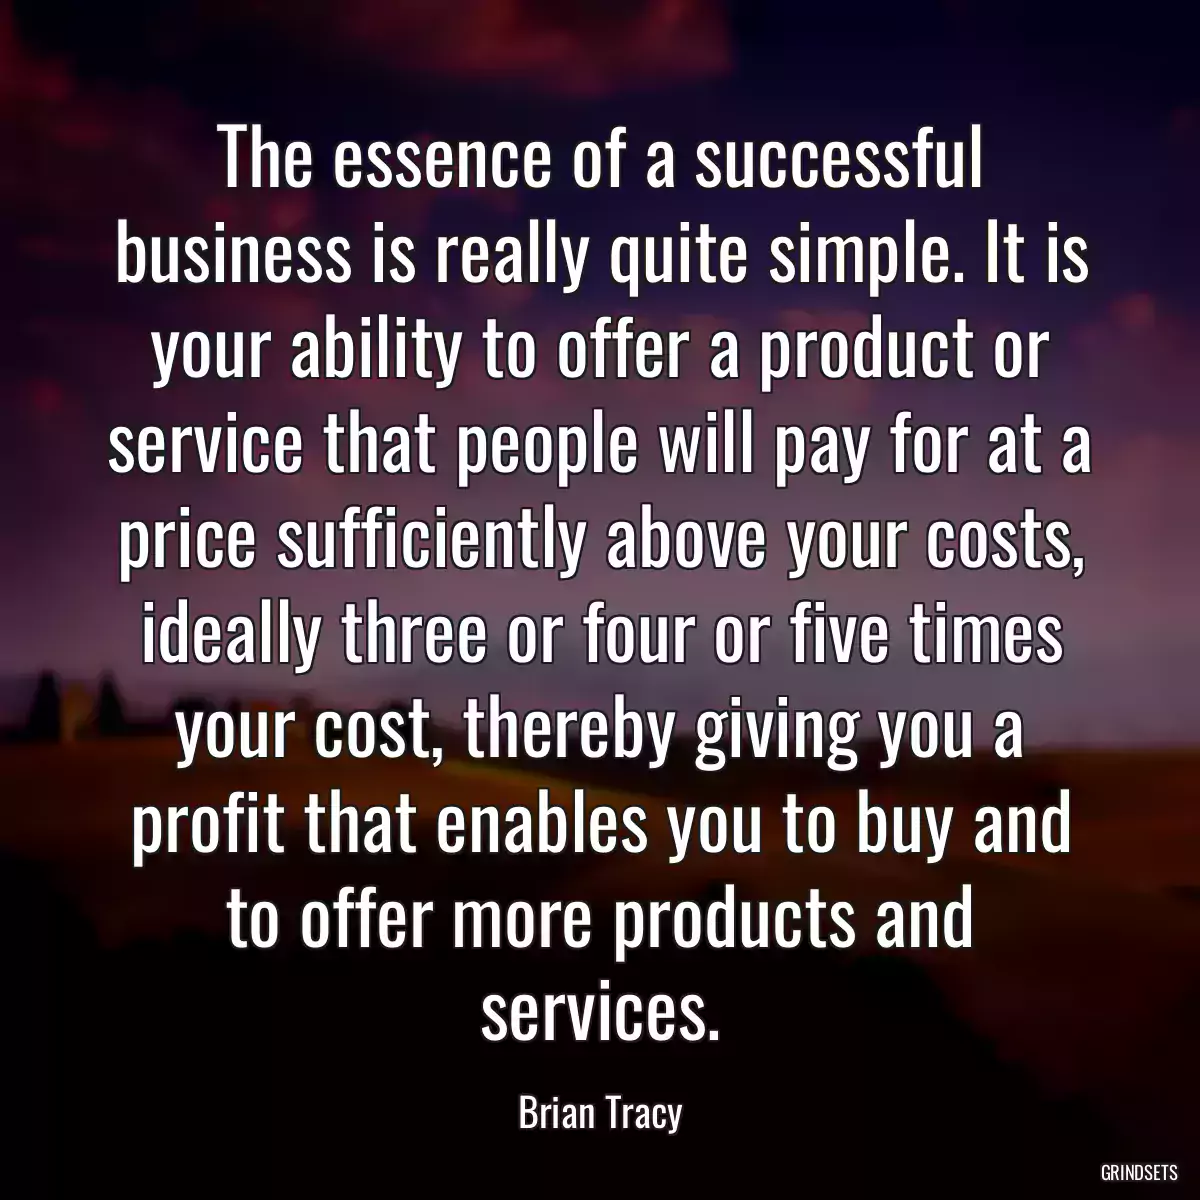 The essence of a successful business is really quite simple. It is your ability to offer a product or service that people will pay for at a price sufficiently above your costs, ideally three or four or five times your cost, thereby giving you a profit that enables you to buy and to offer more products and services.